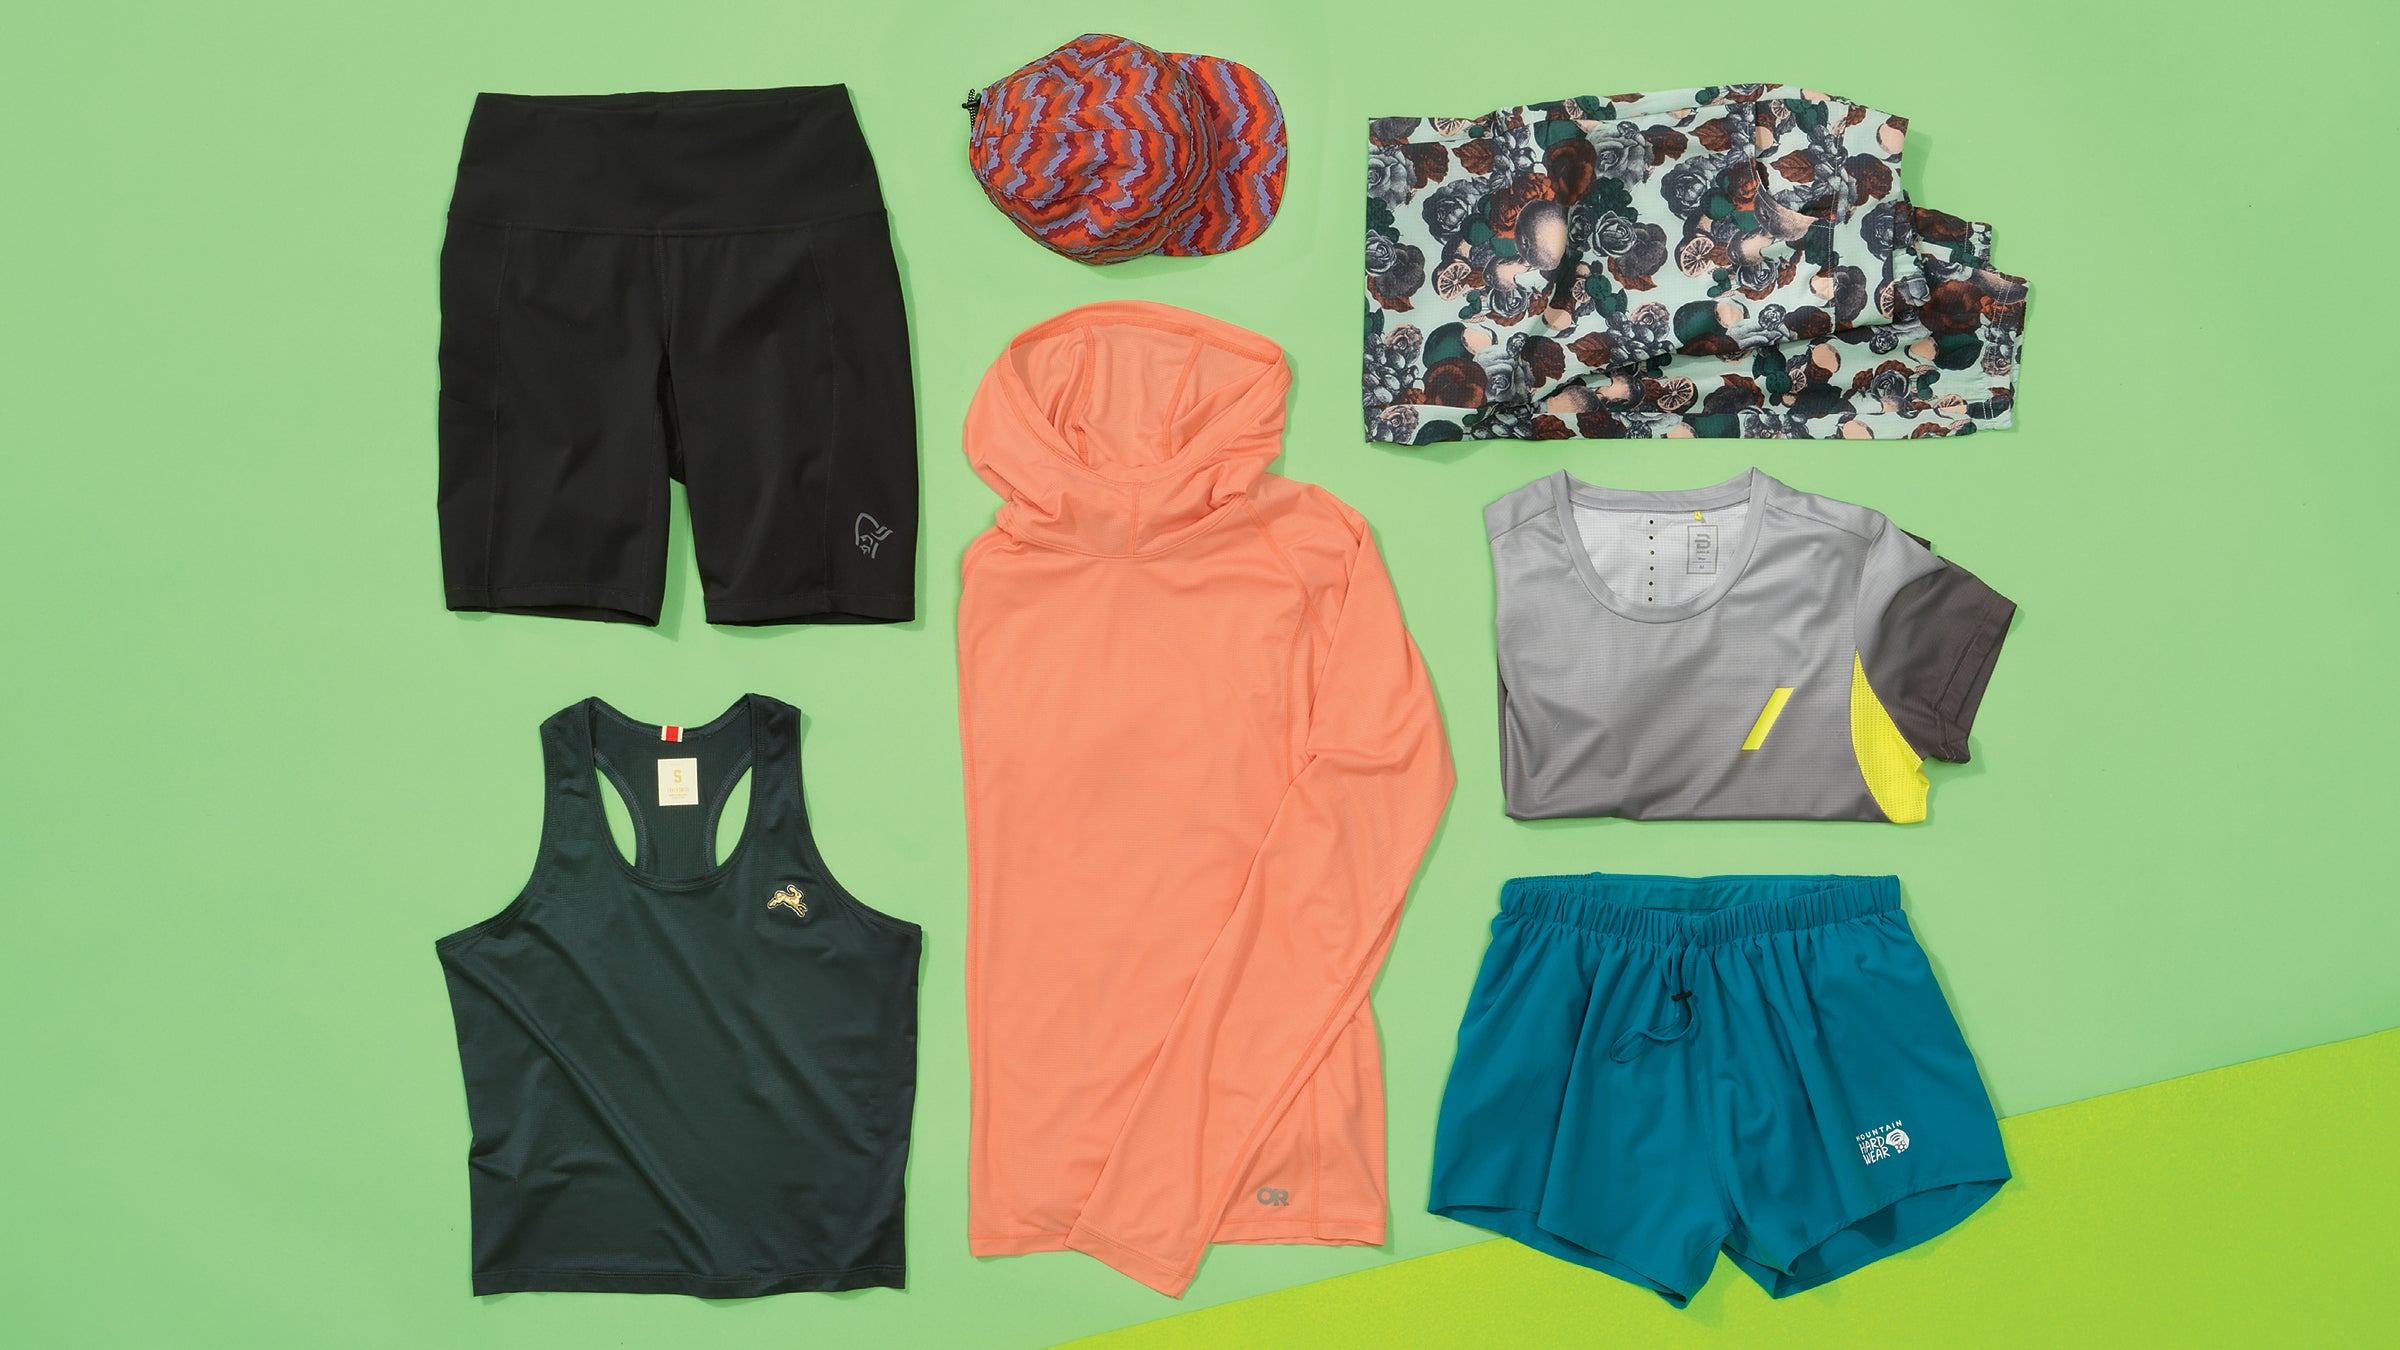 On Running Clothing - Men's and Women's